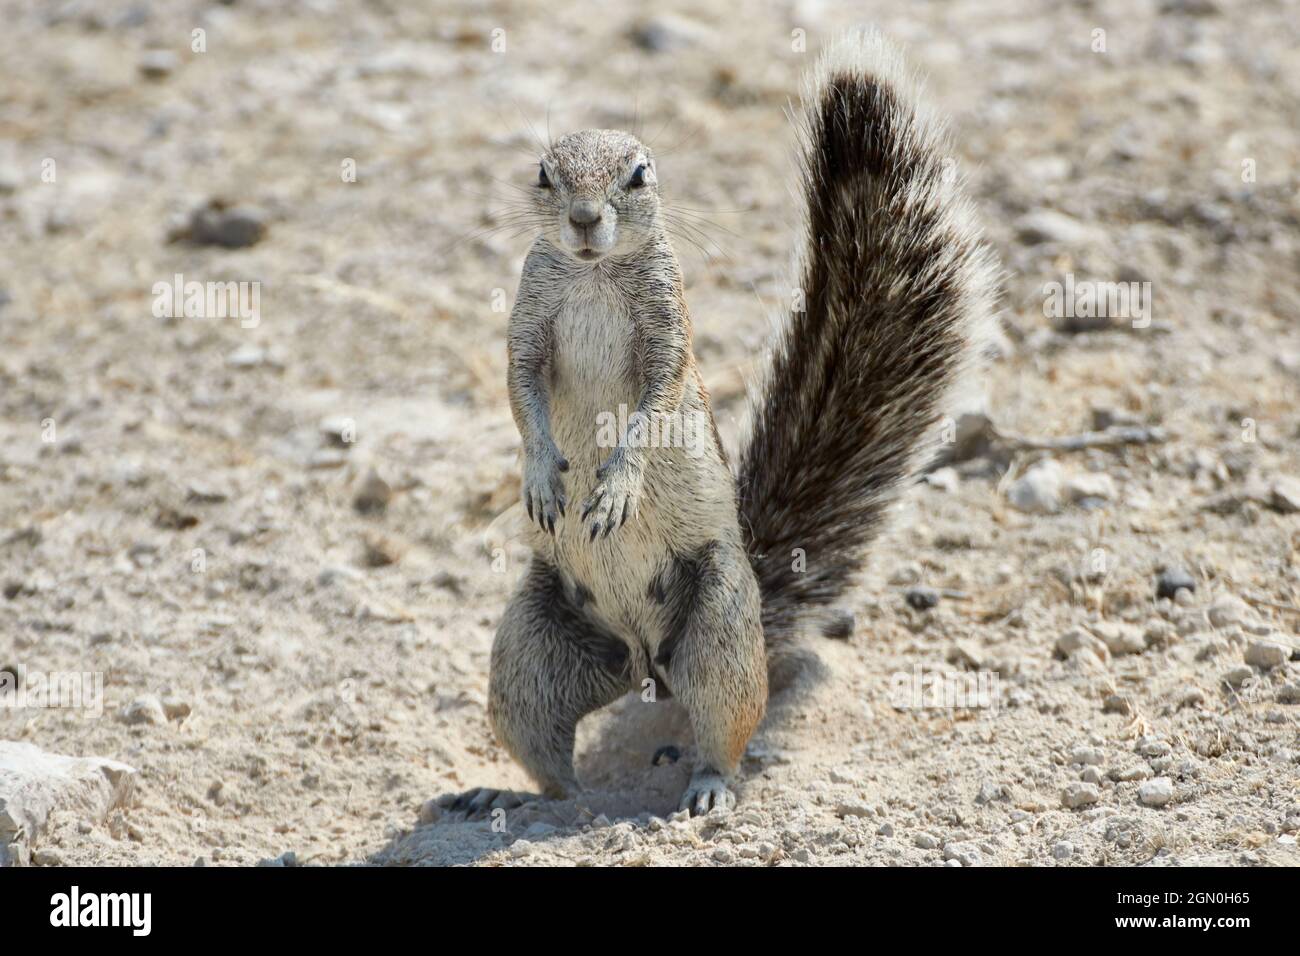 Cape ground squirrel or South African ground squirrel standing in Namibian  desert Stock Photo - Alamy